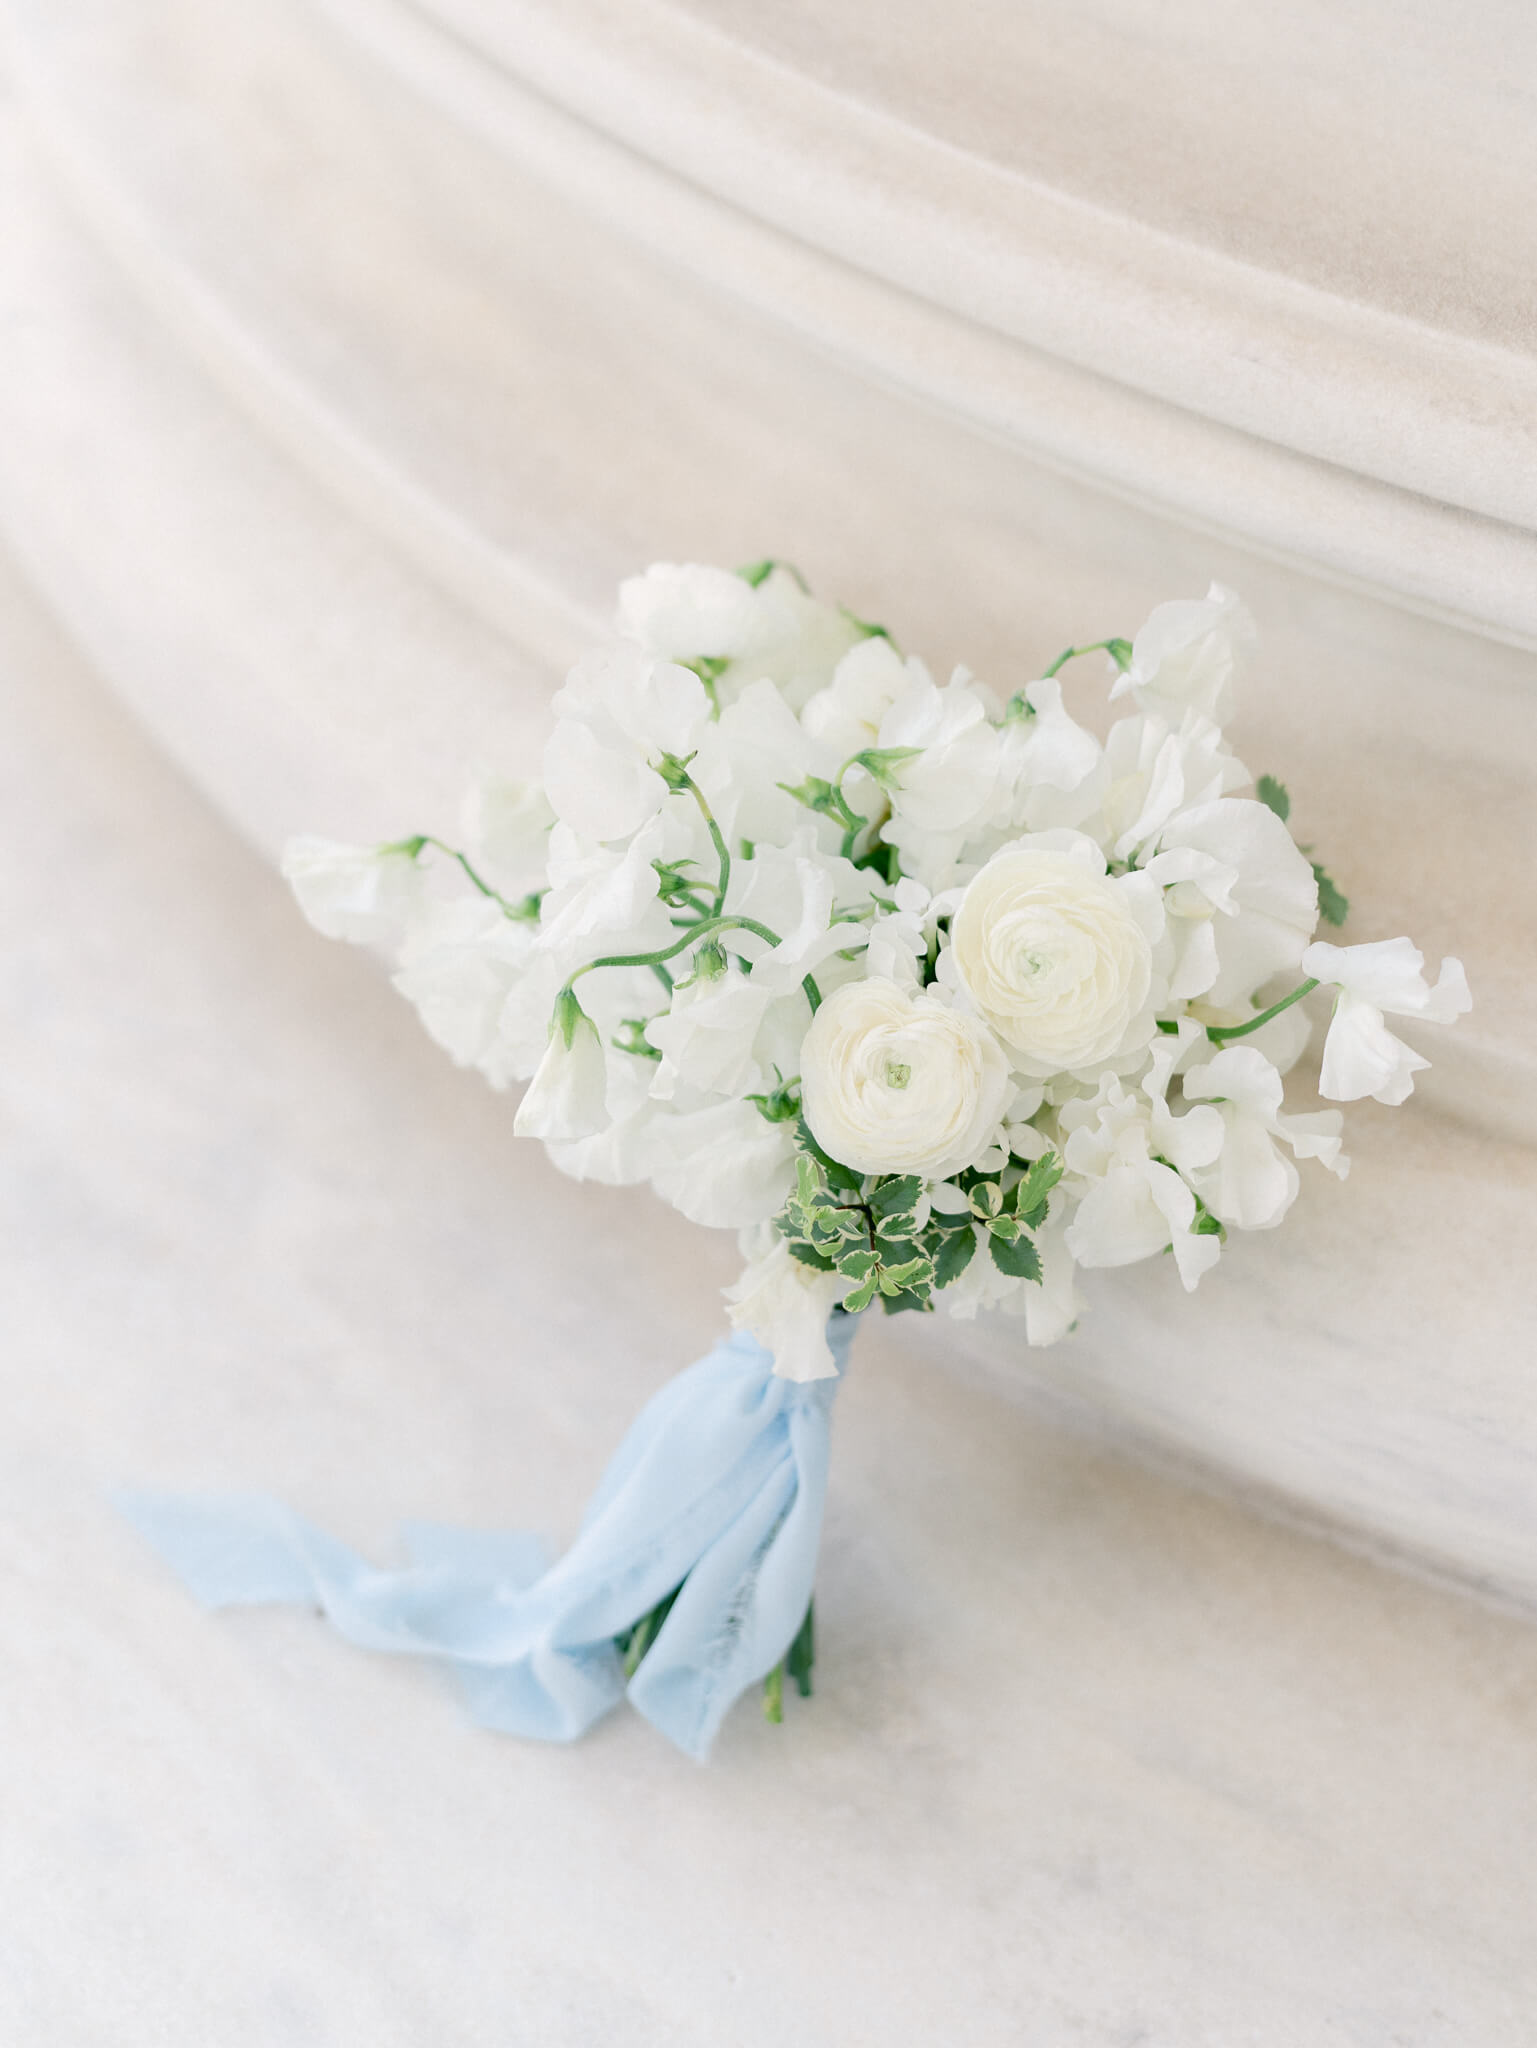 A bouquet of white ranunculus and sweet peas tied with a blue ribbon.